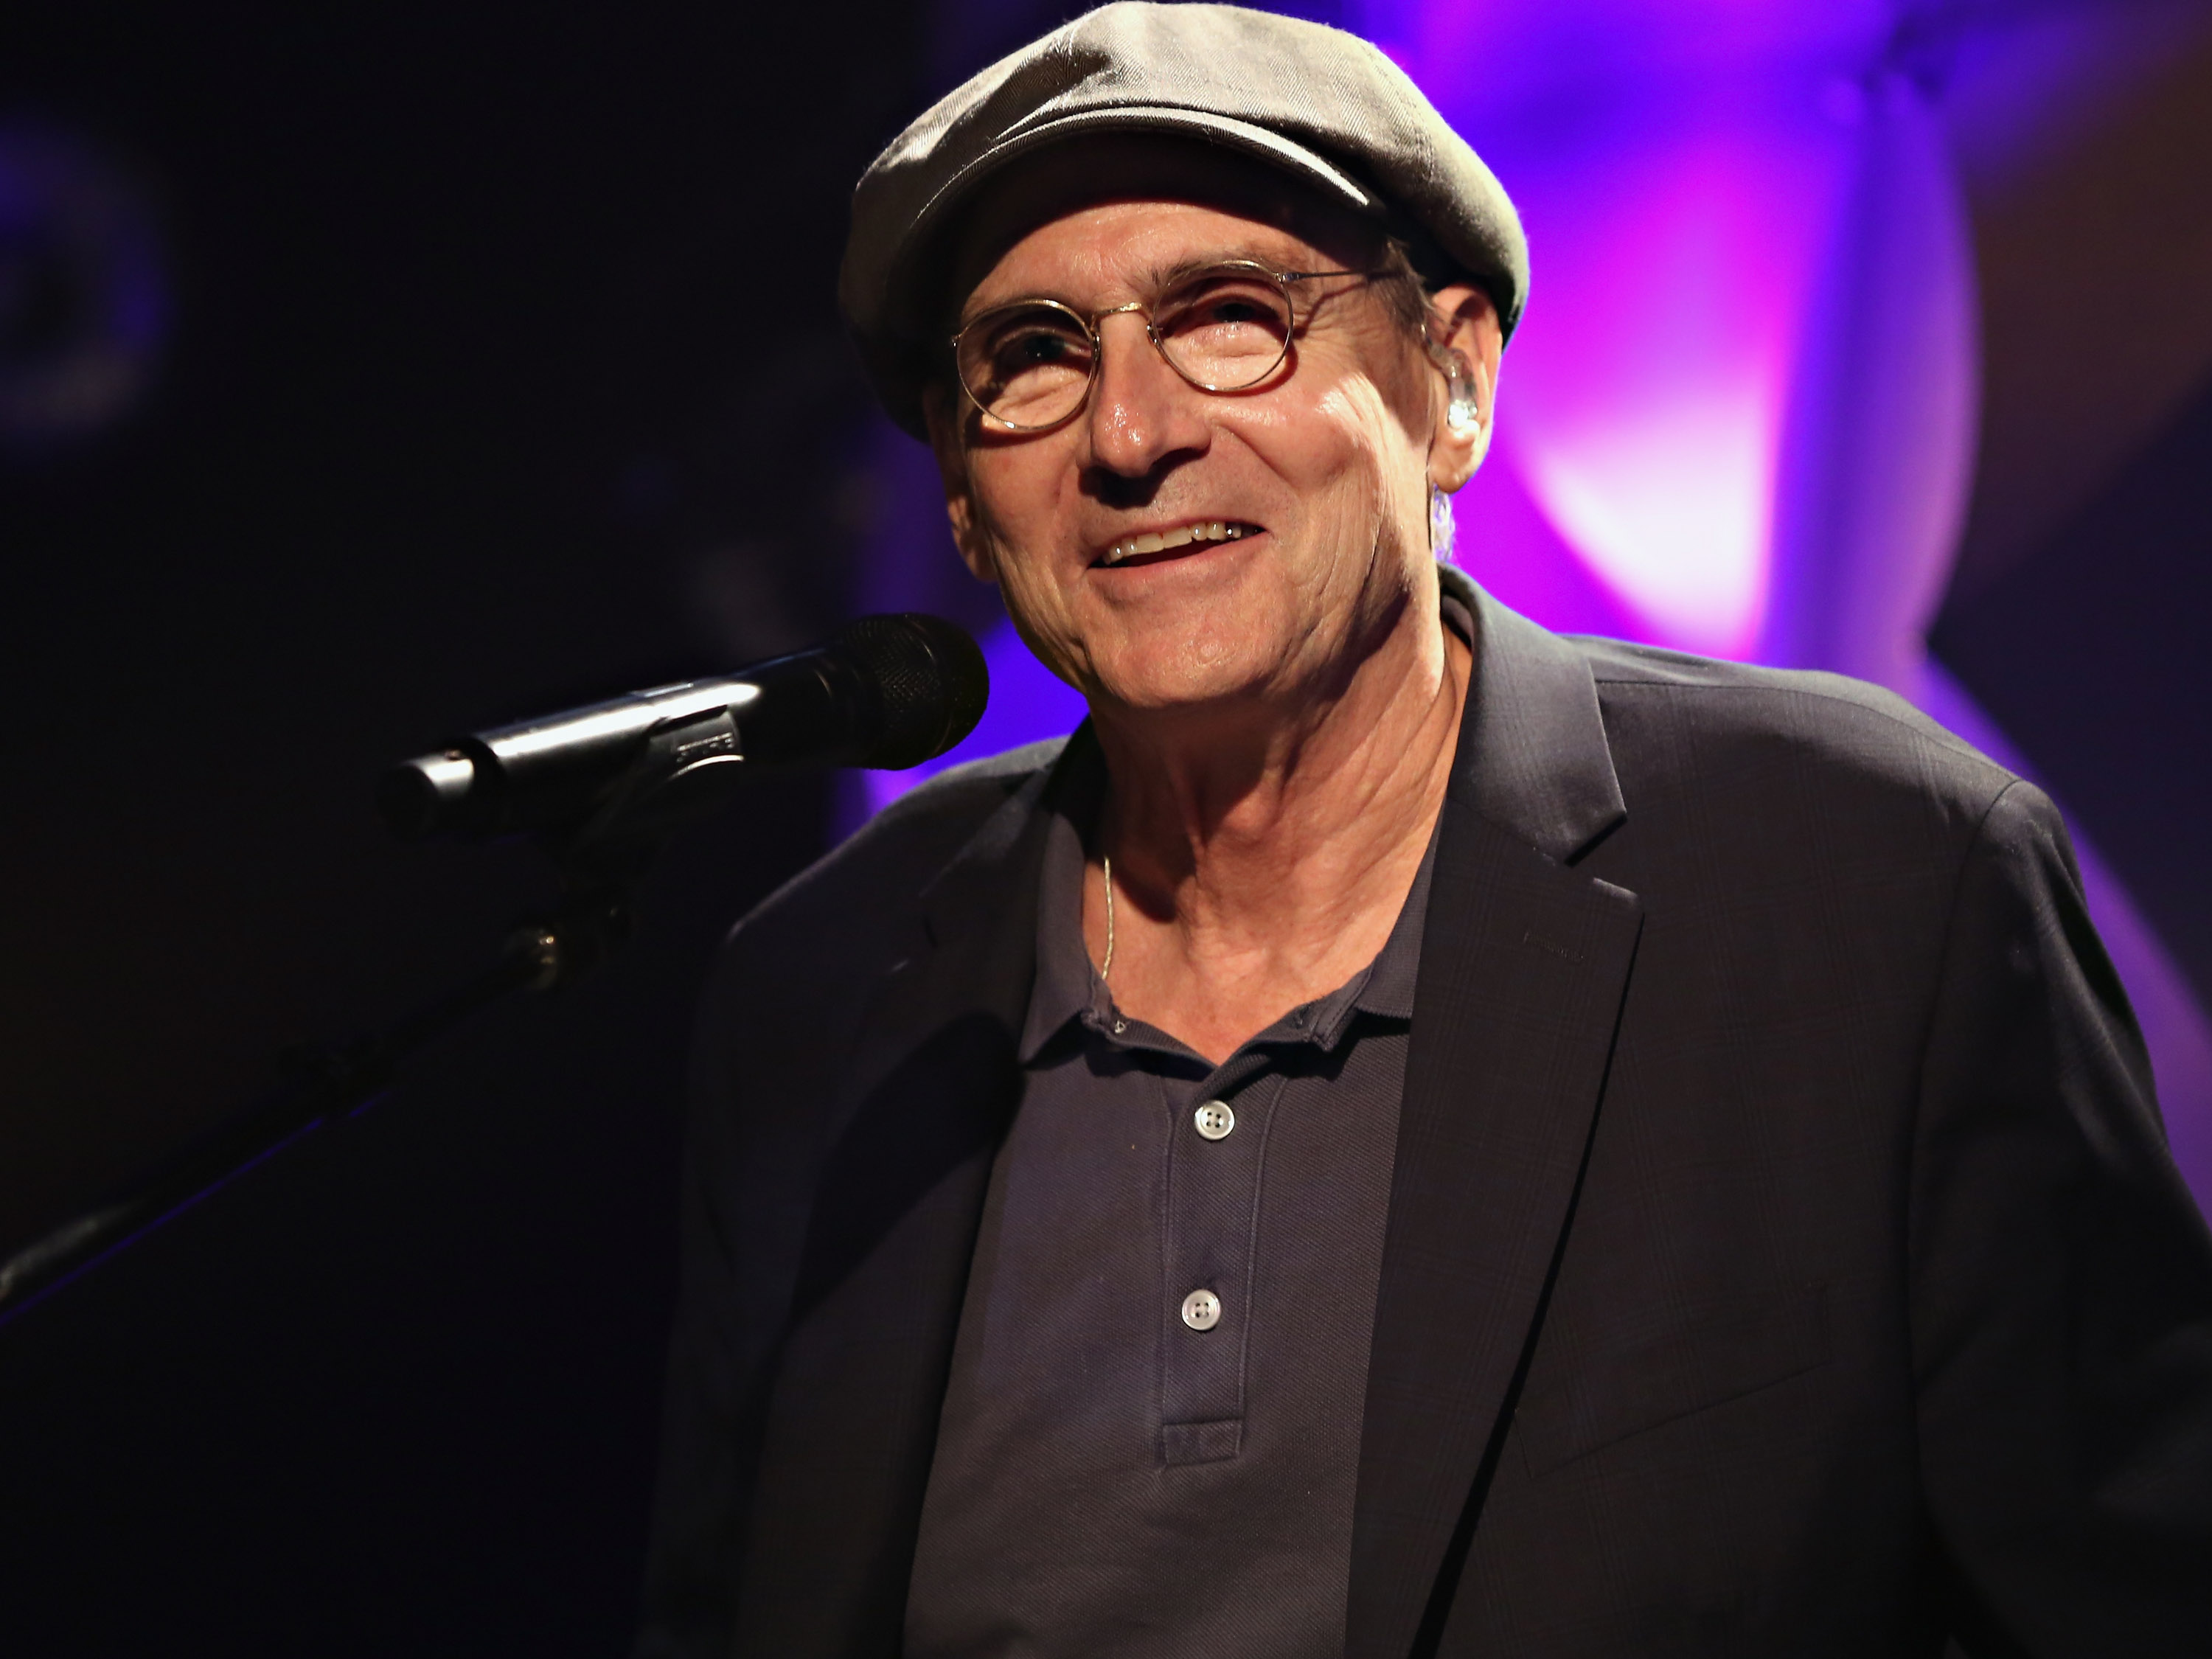 iHeartRadio ICONS With James Taylor Presented By P.C. Richard &amp; Son